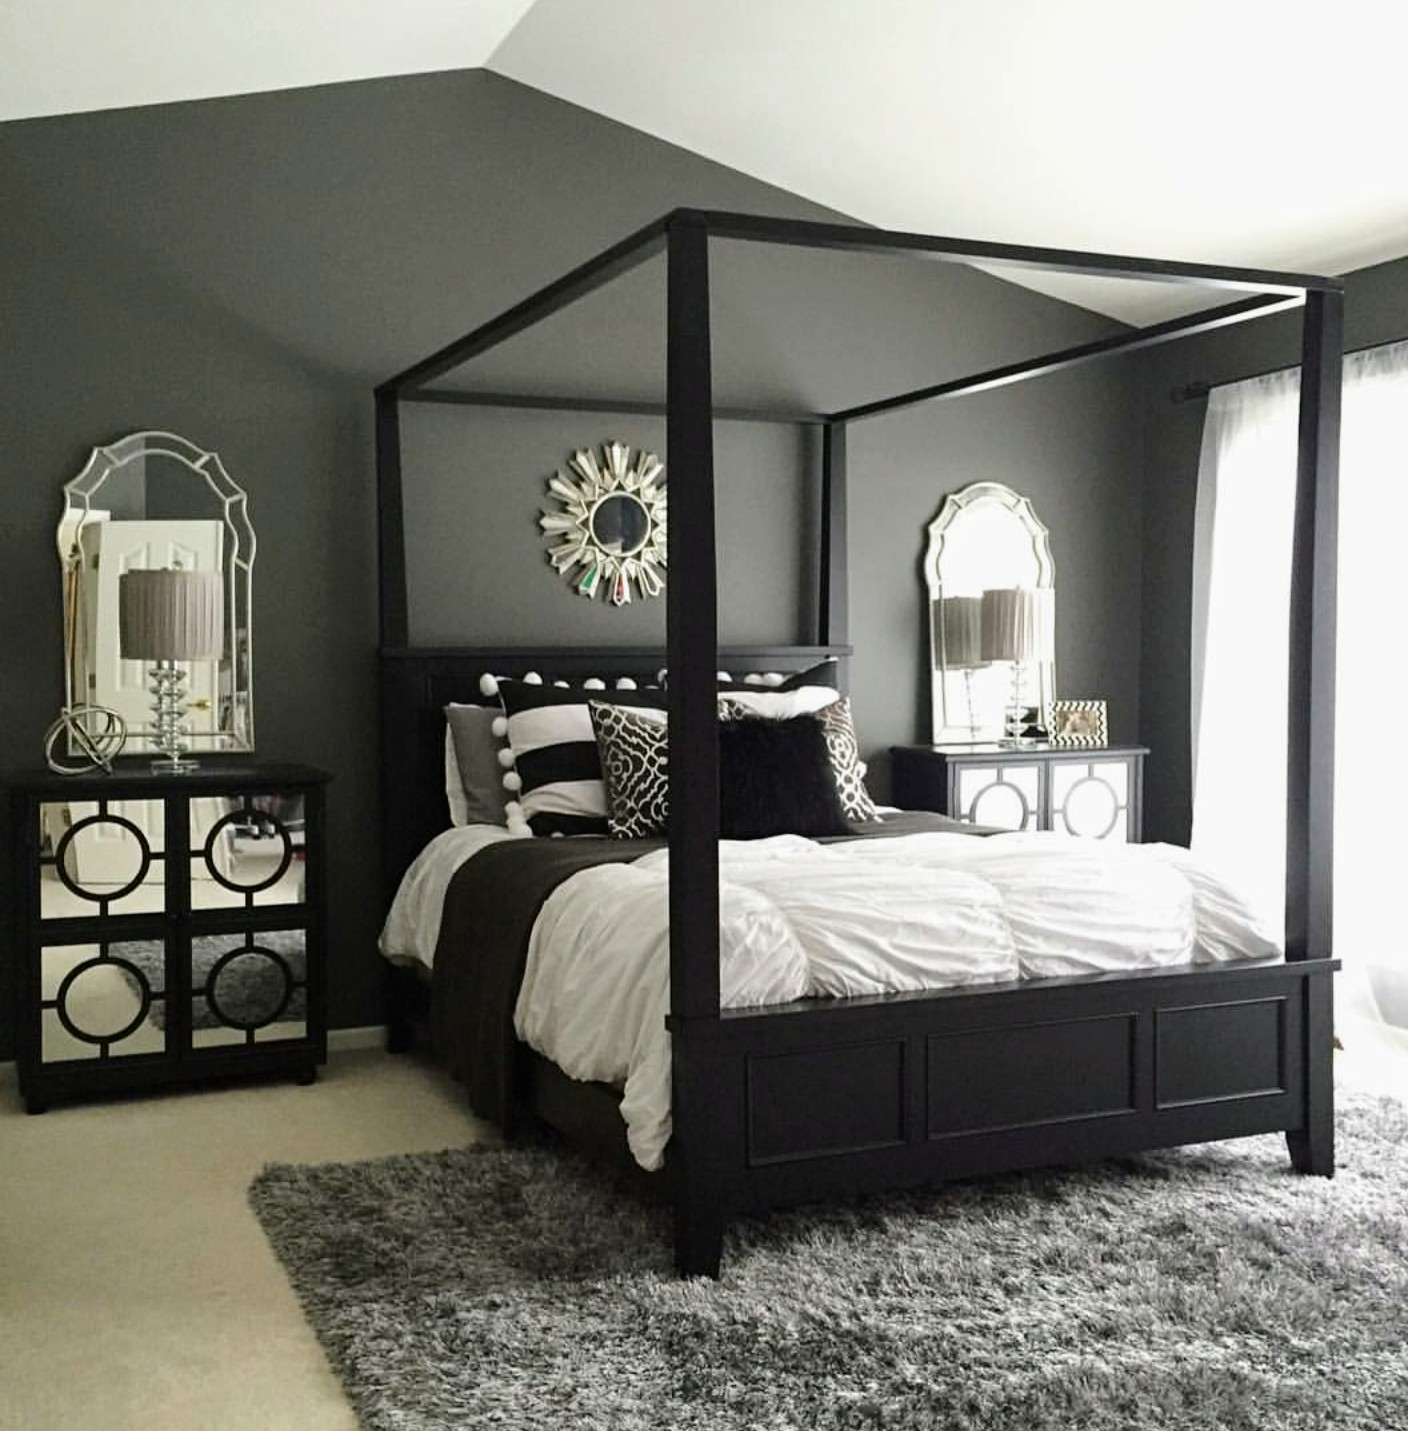 Oscar Bravo Home: BLACK MAGIC - Ideas For Using The Color Black In Your ...